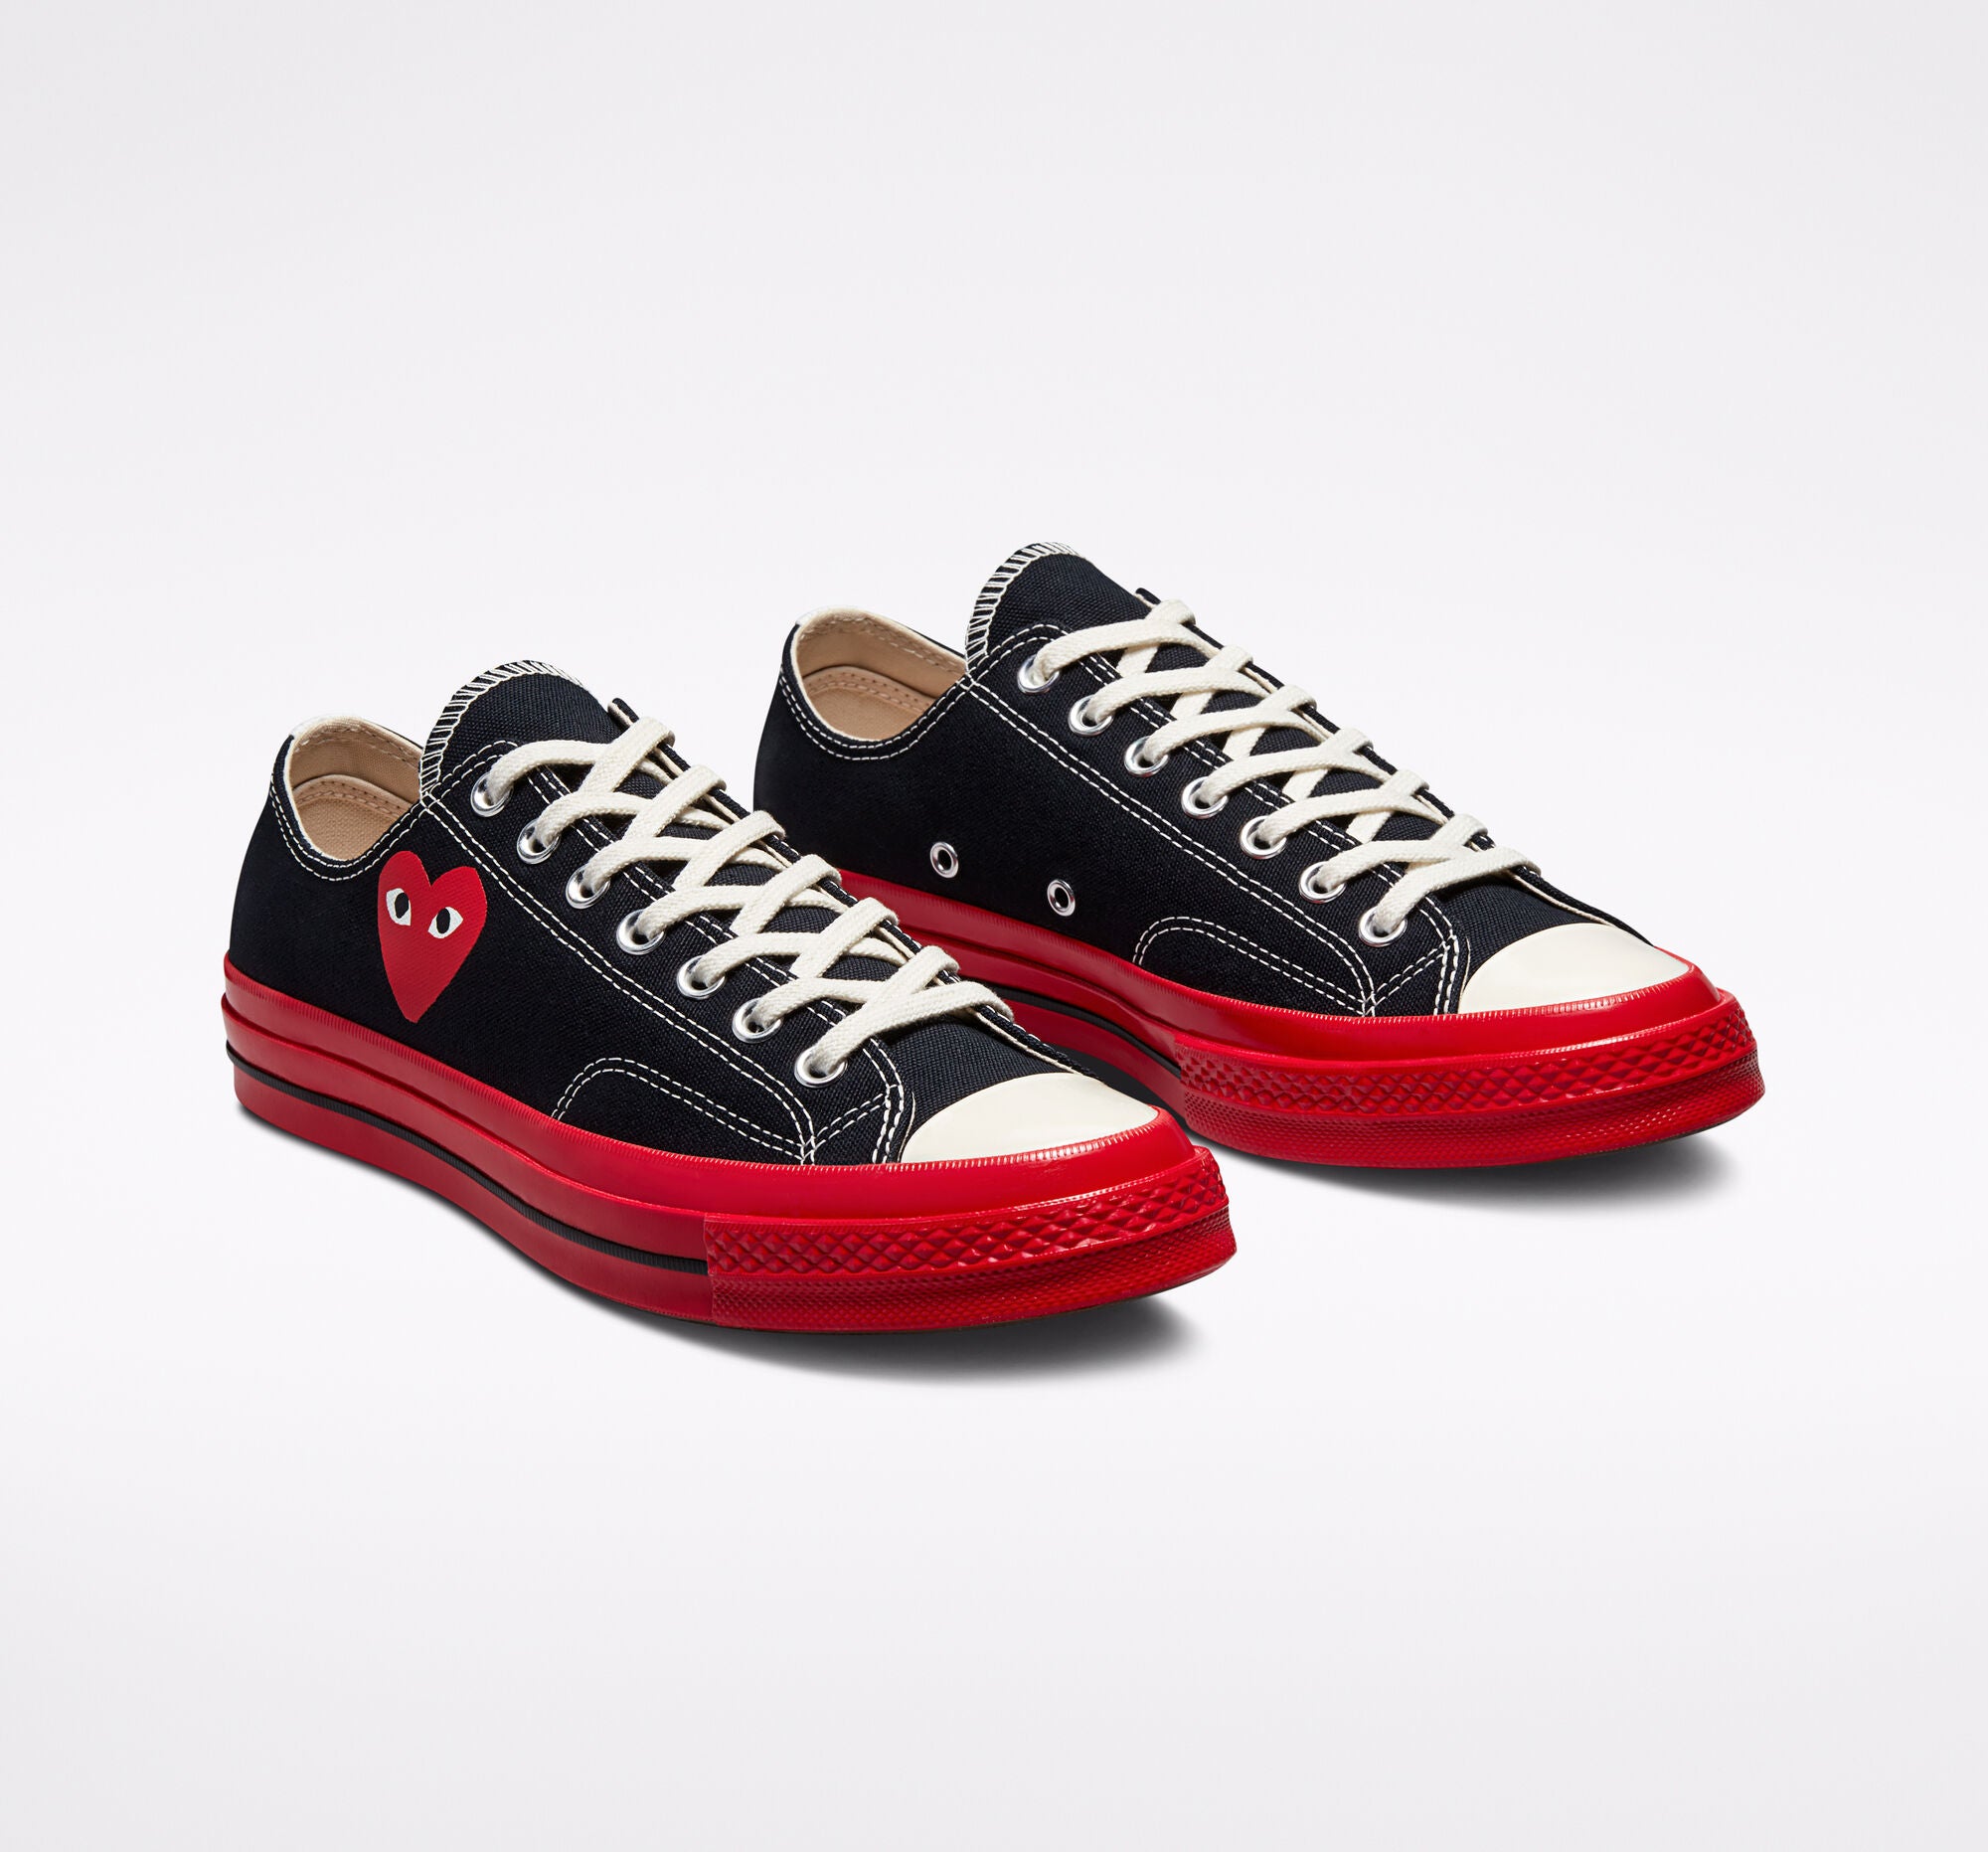 CDG PLAY X CONVERSE RED SOLE BLACK LOW TOP SNEAKERS – The Modern Shop